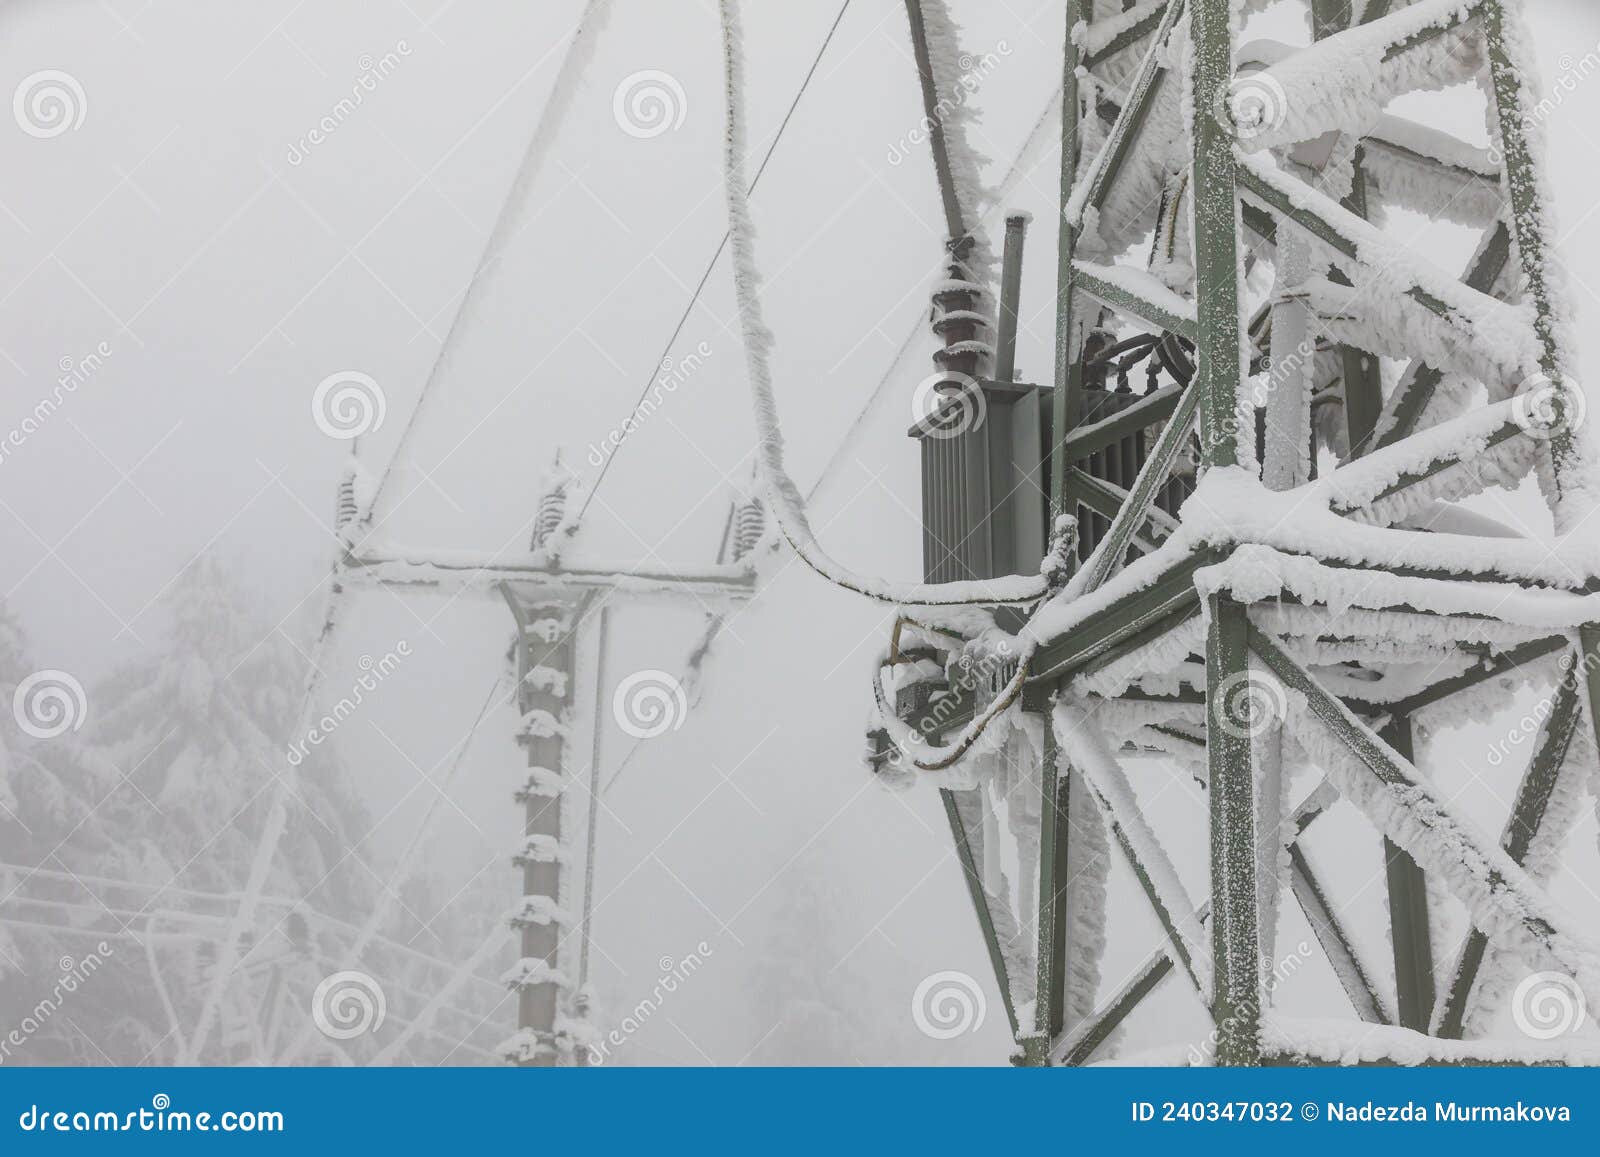 frozen power line pylons. hoarfrost on high voltage cables and pylons. winter in the mountains